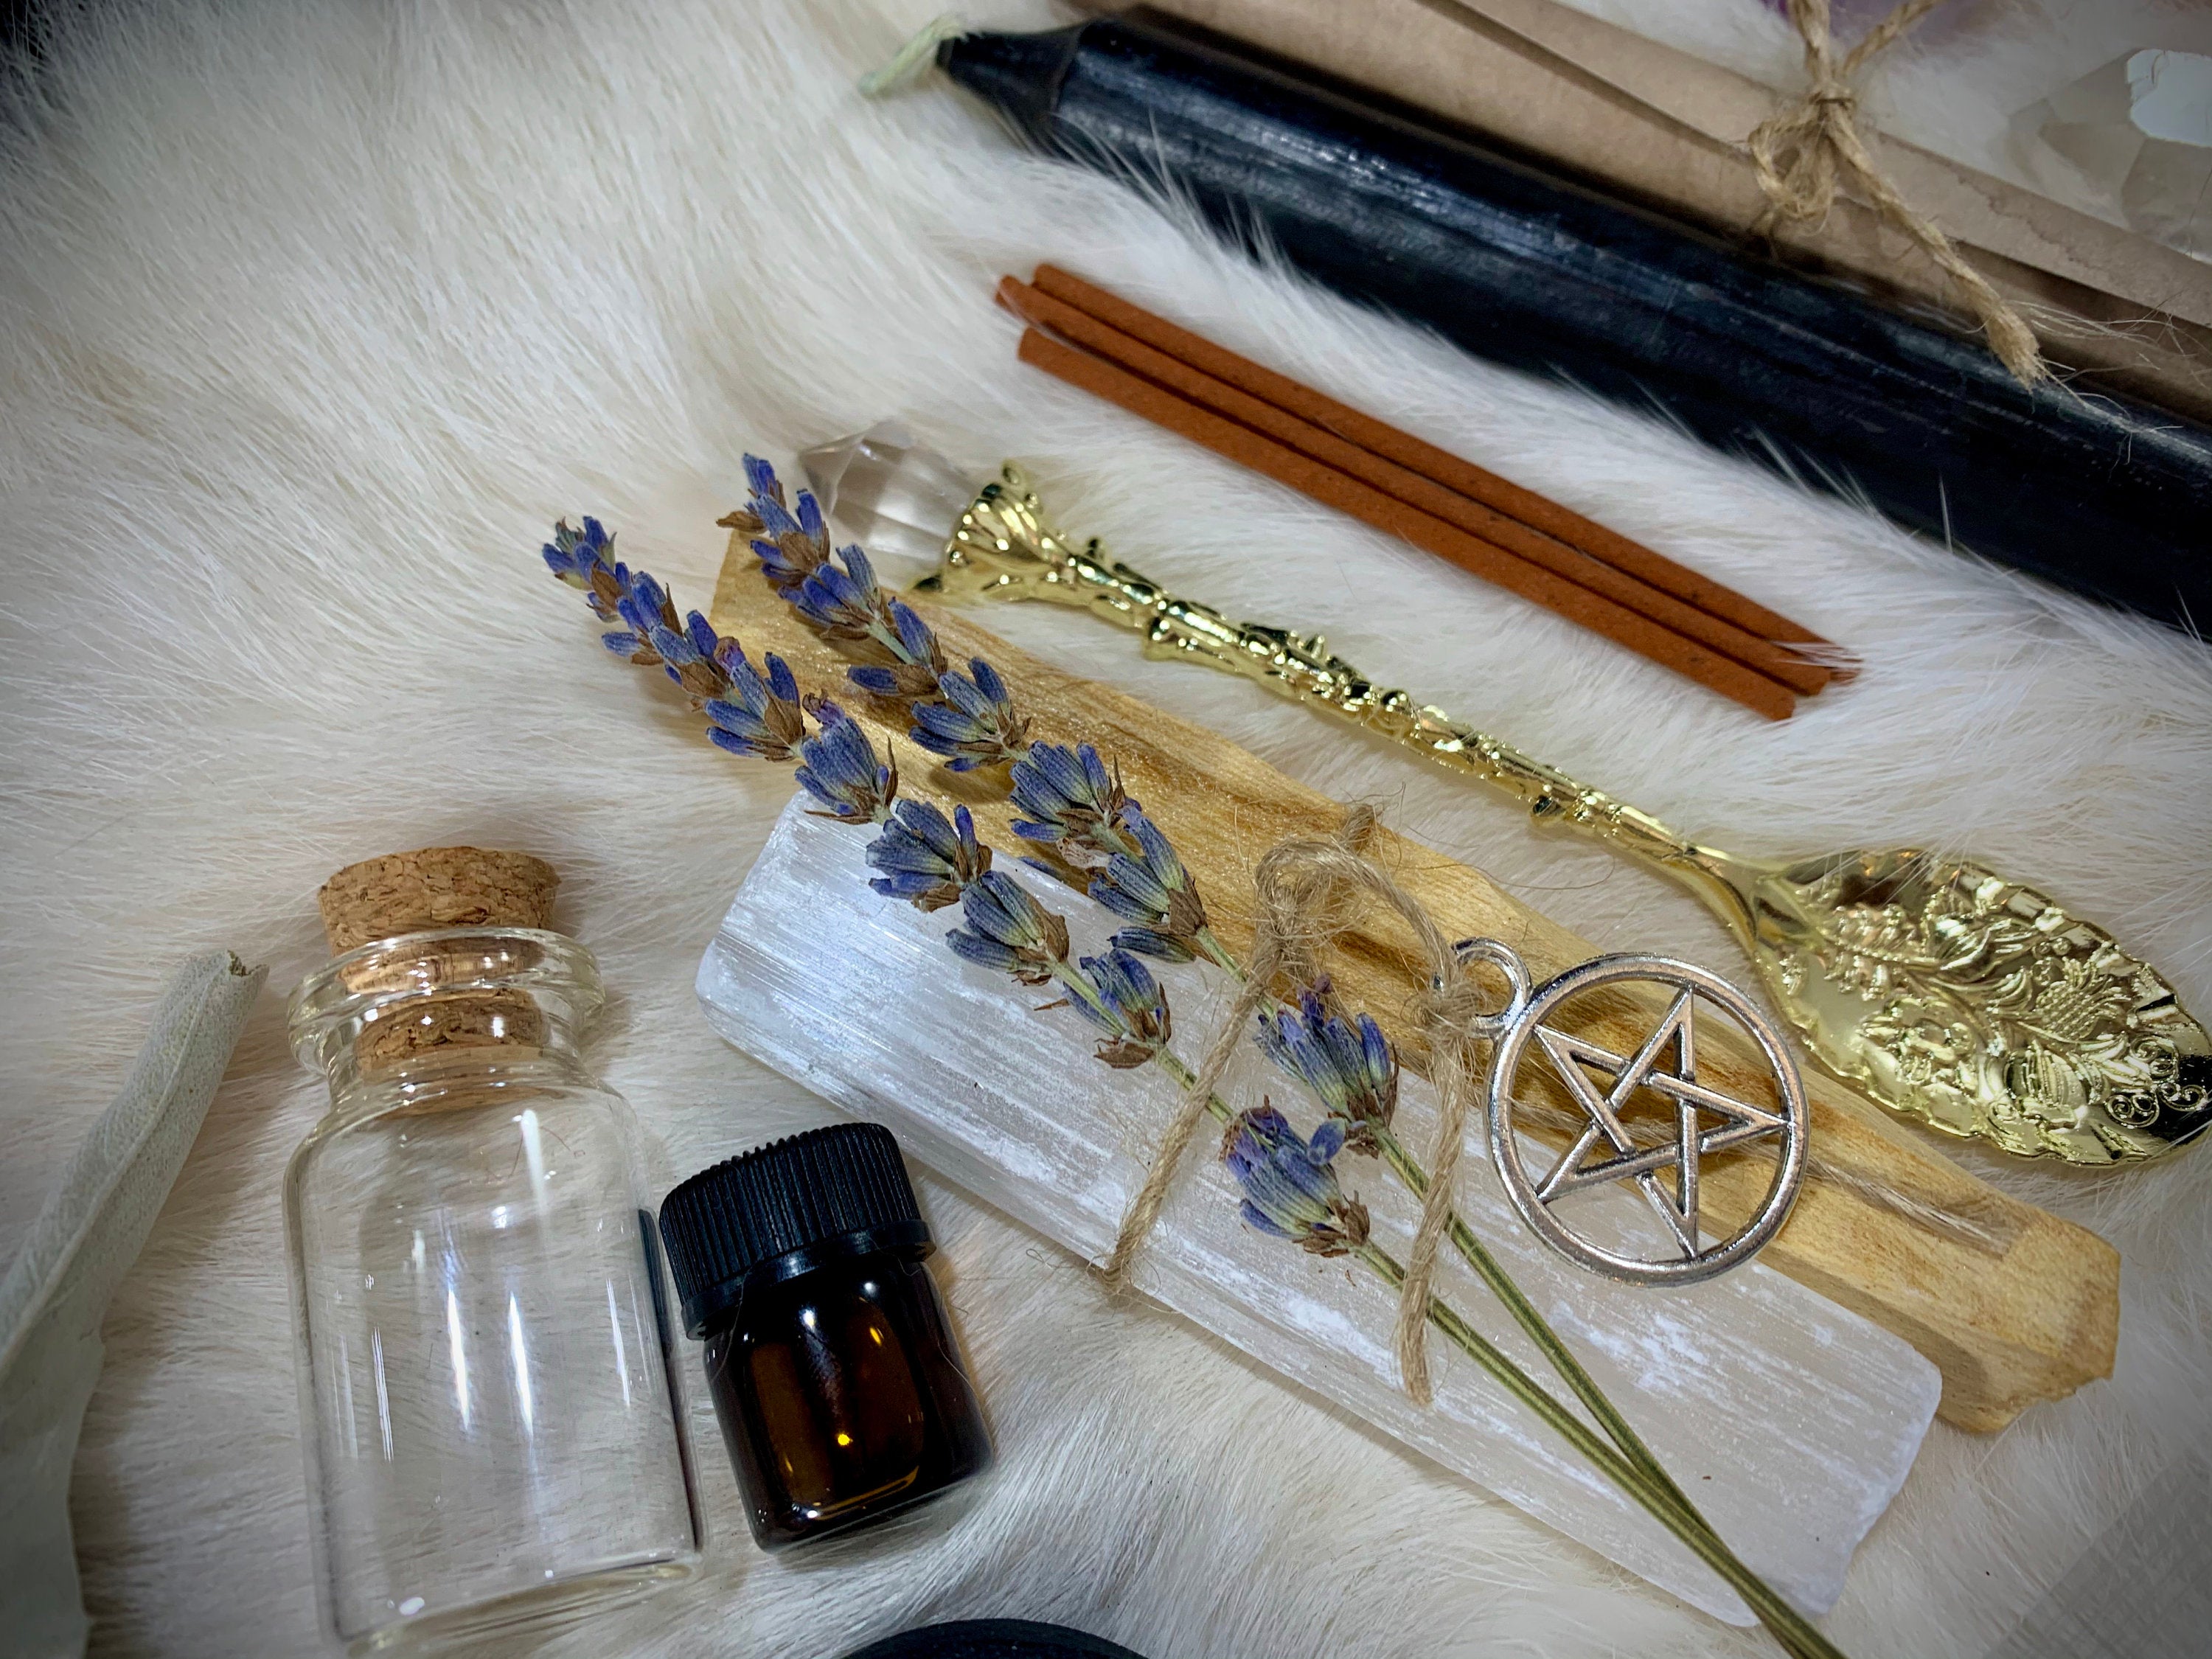 WITCHCRAFT KIT ~ Baby Witch Kit